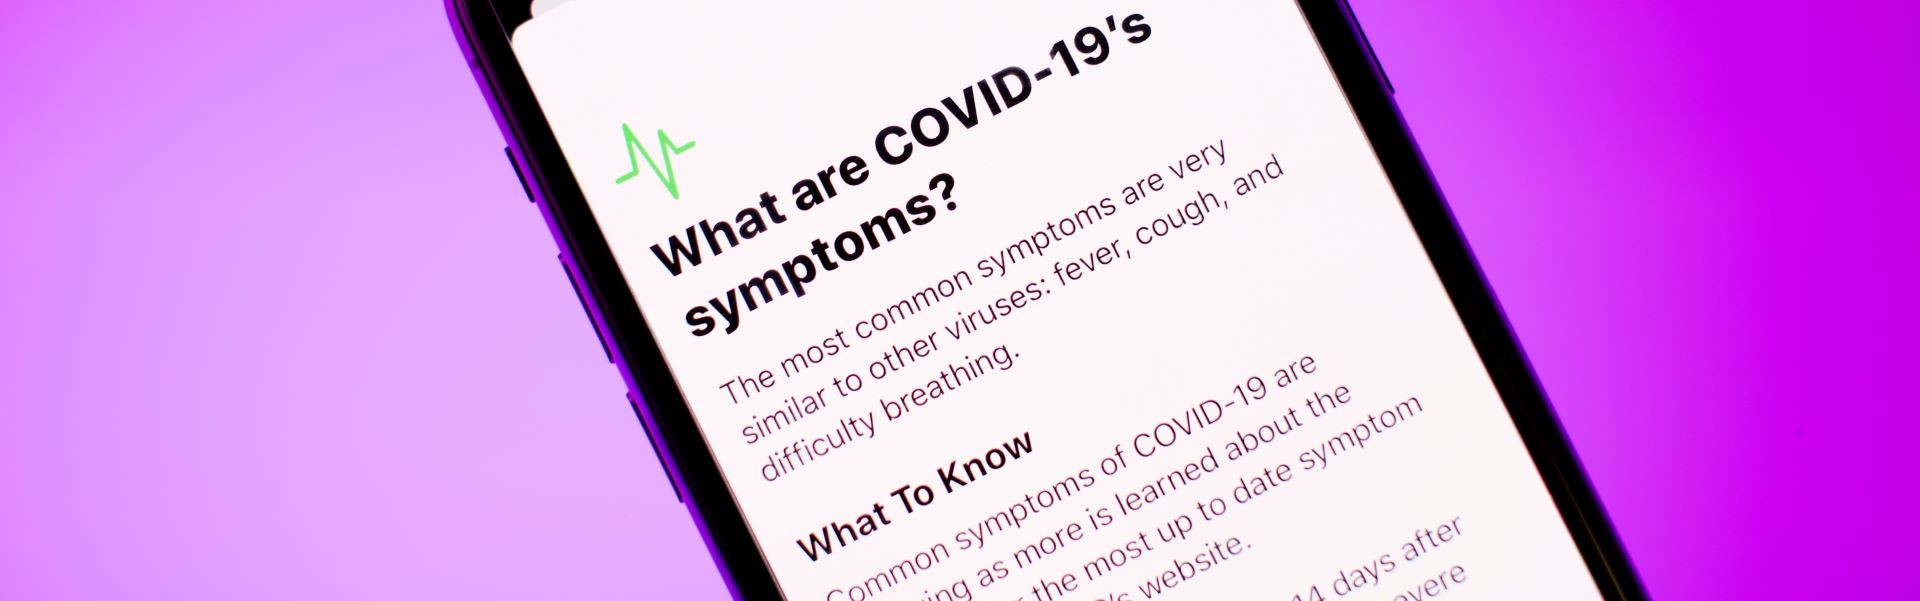 Phone with text on covid symptoms